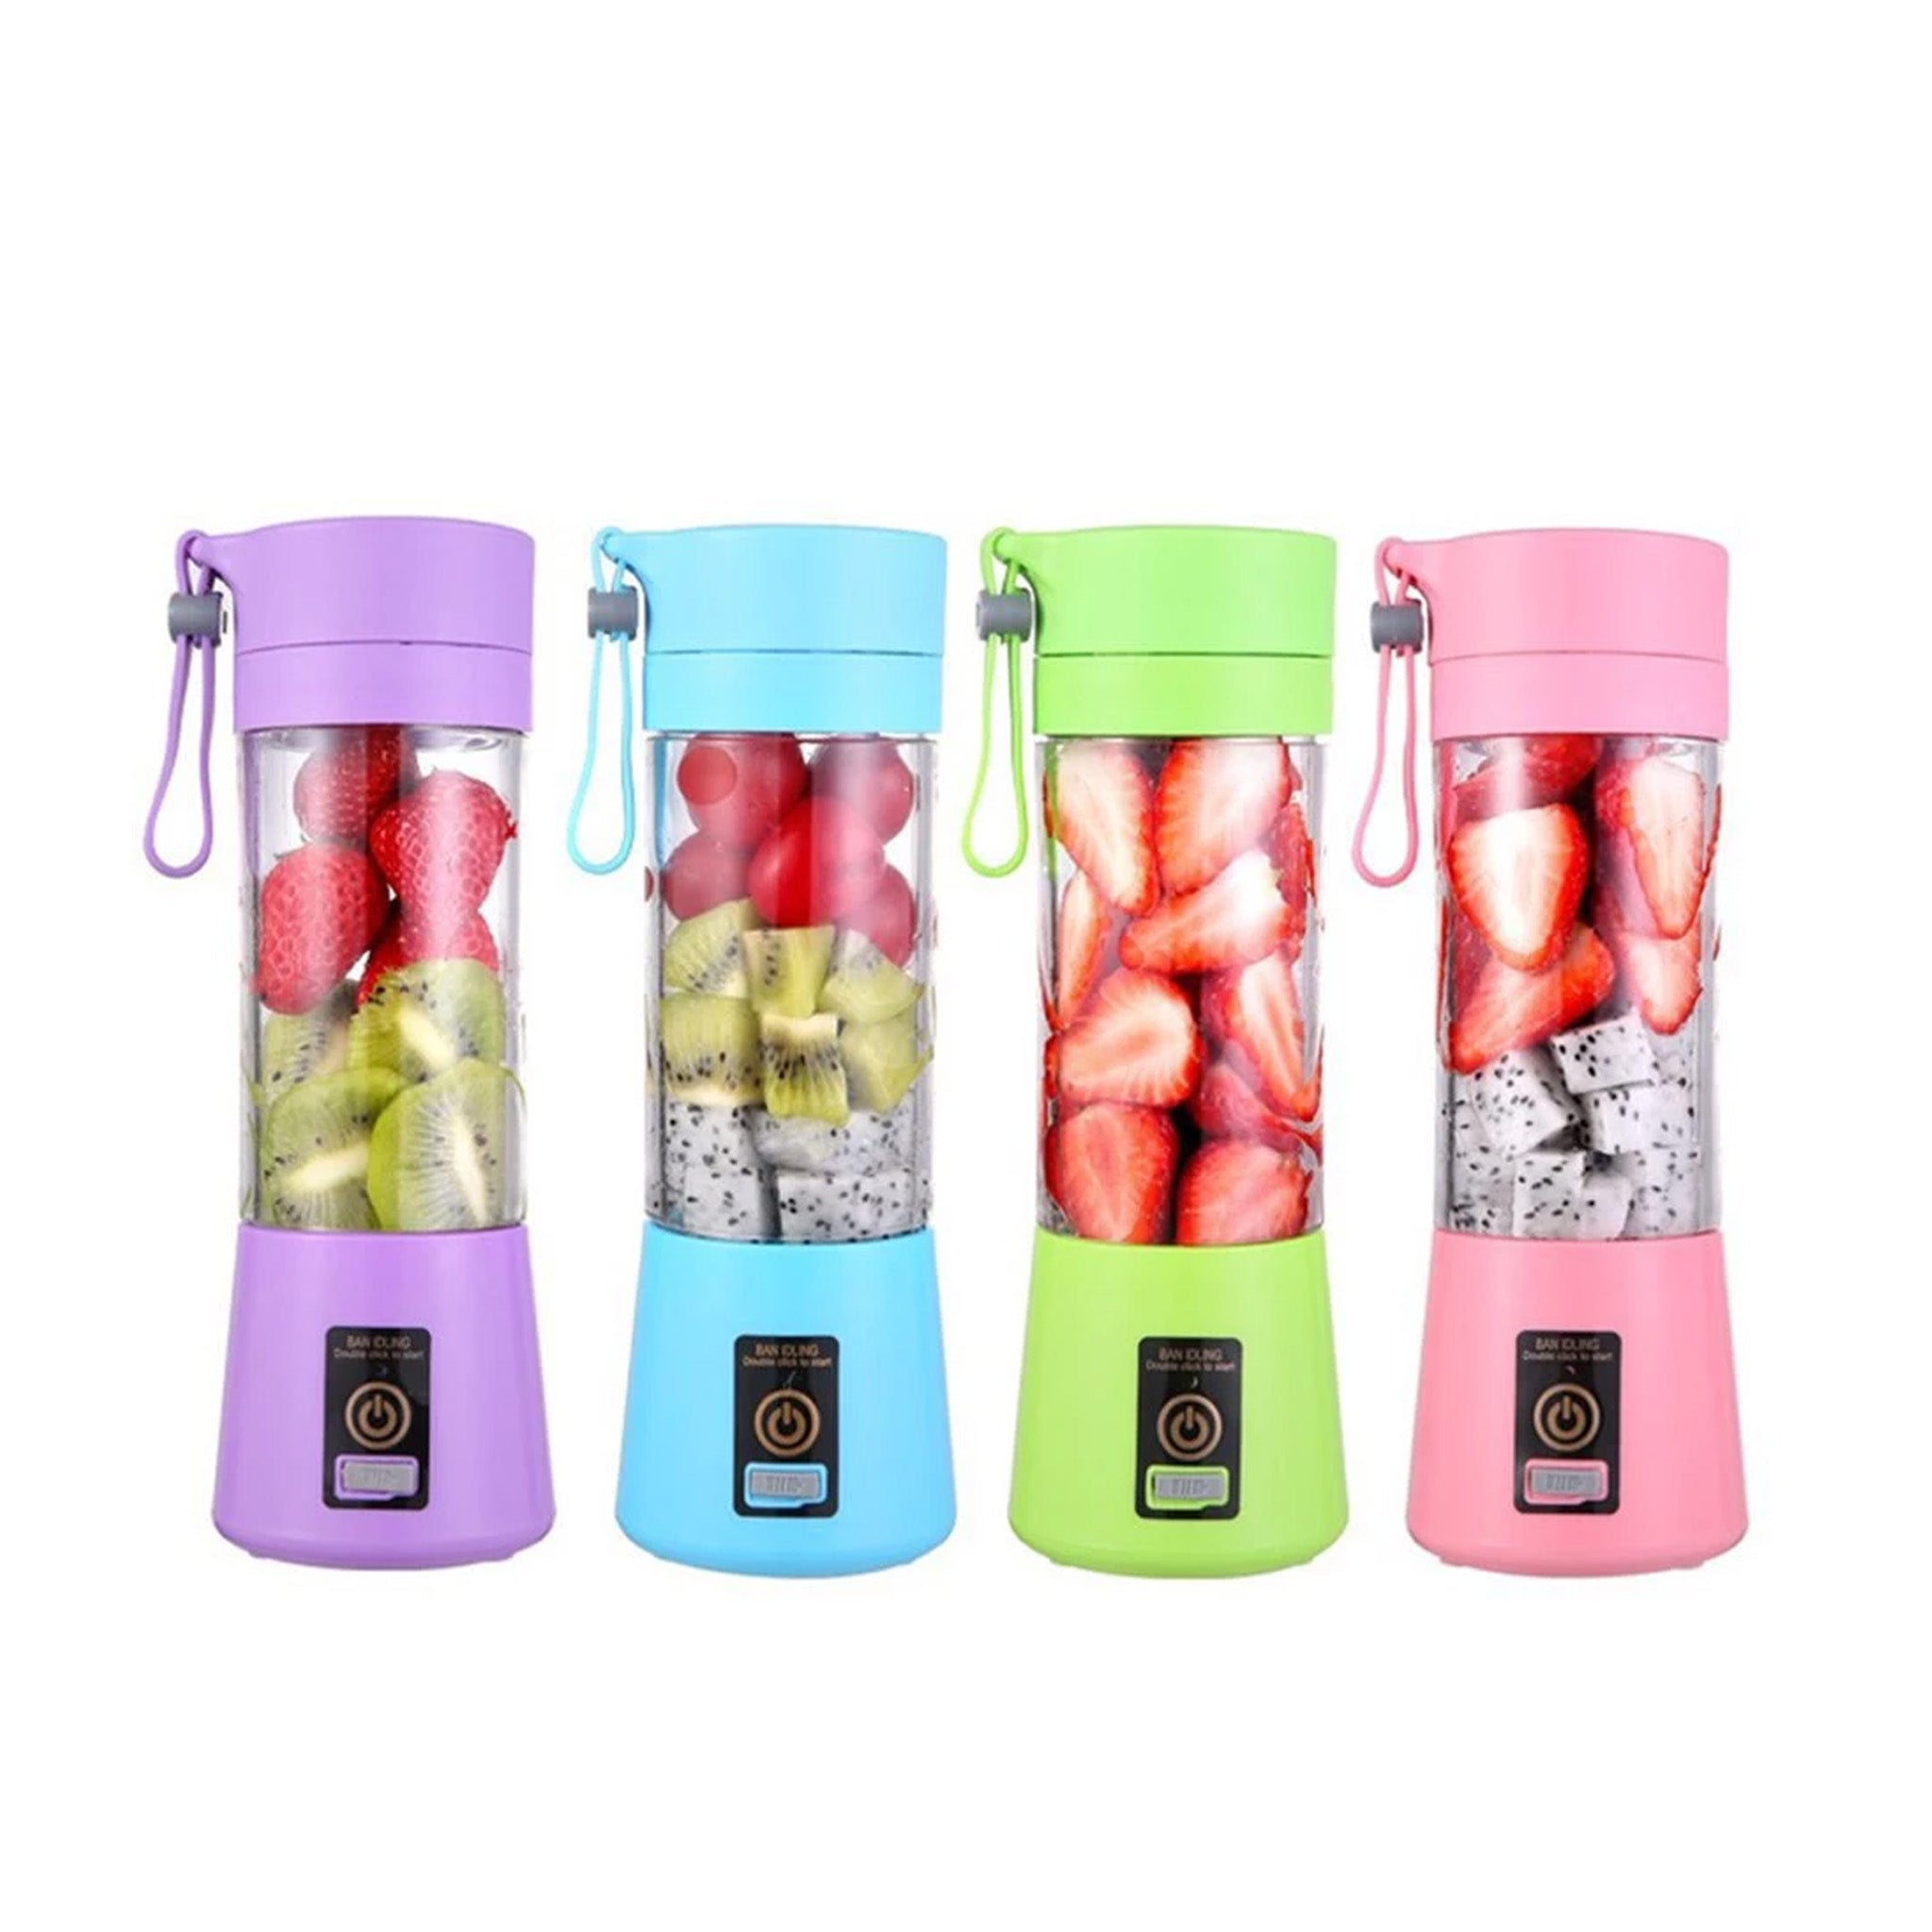 LKH210730-45, Portable and rechargeable juice blender